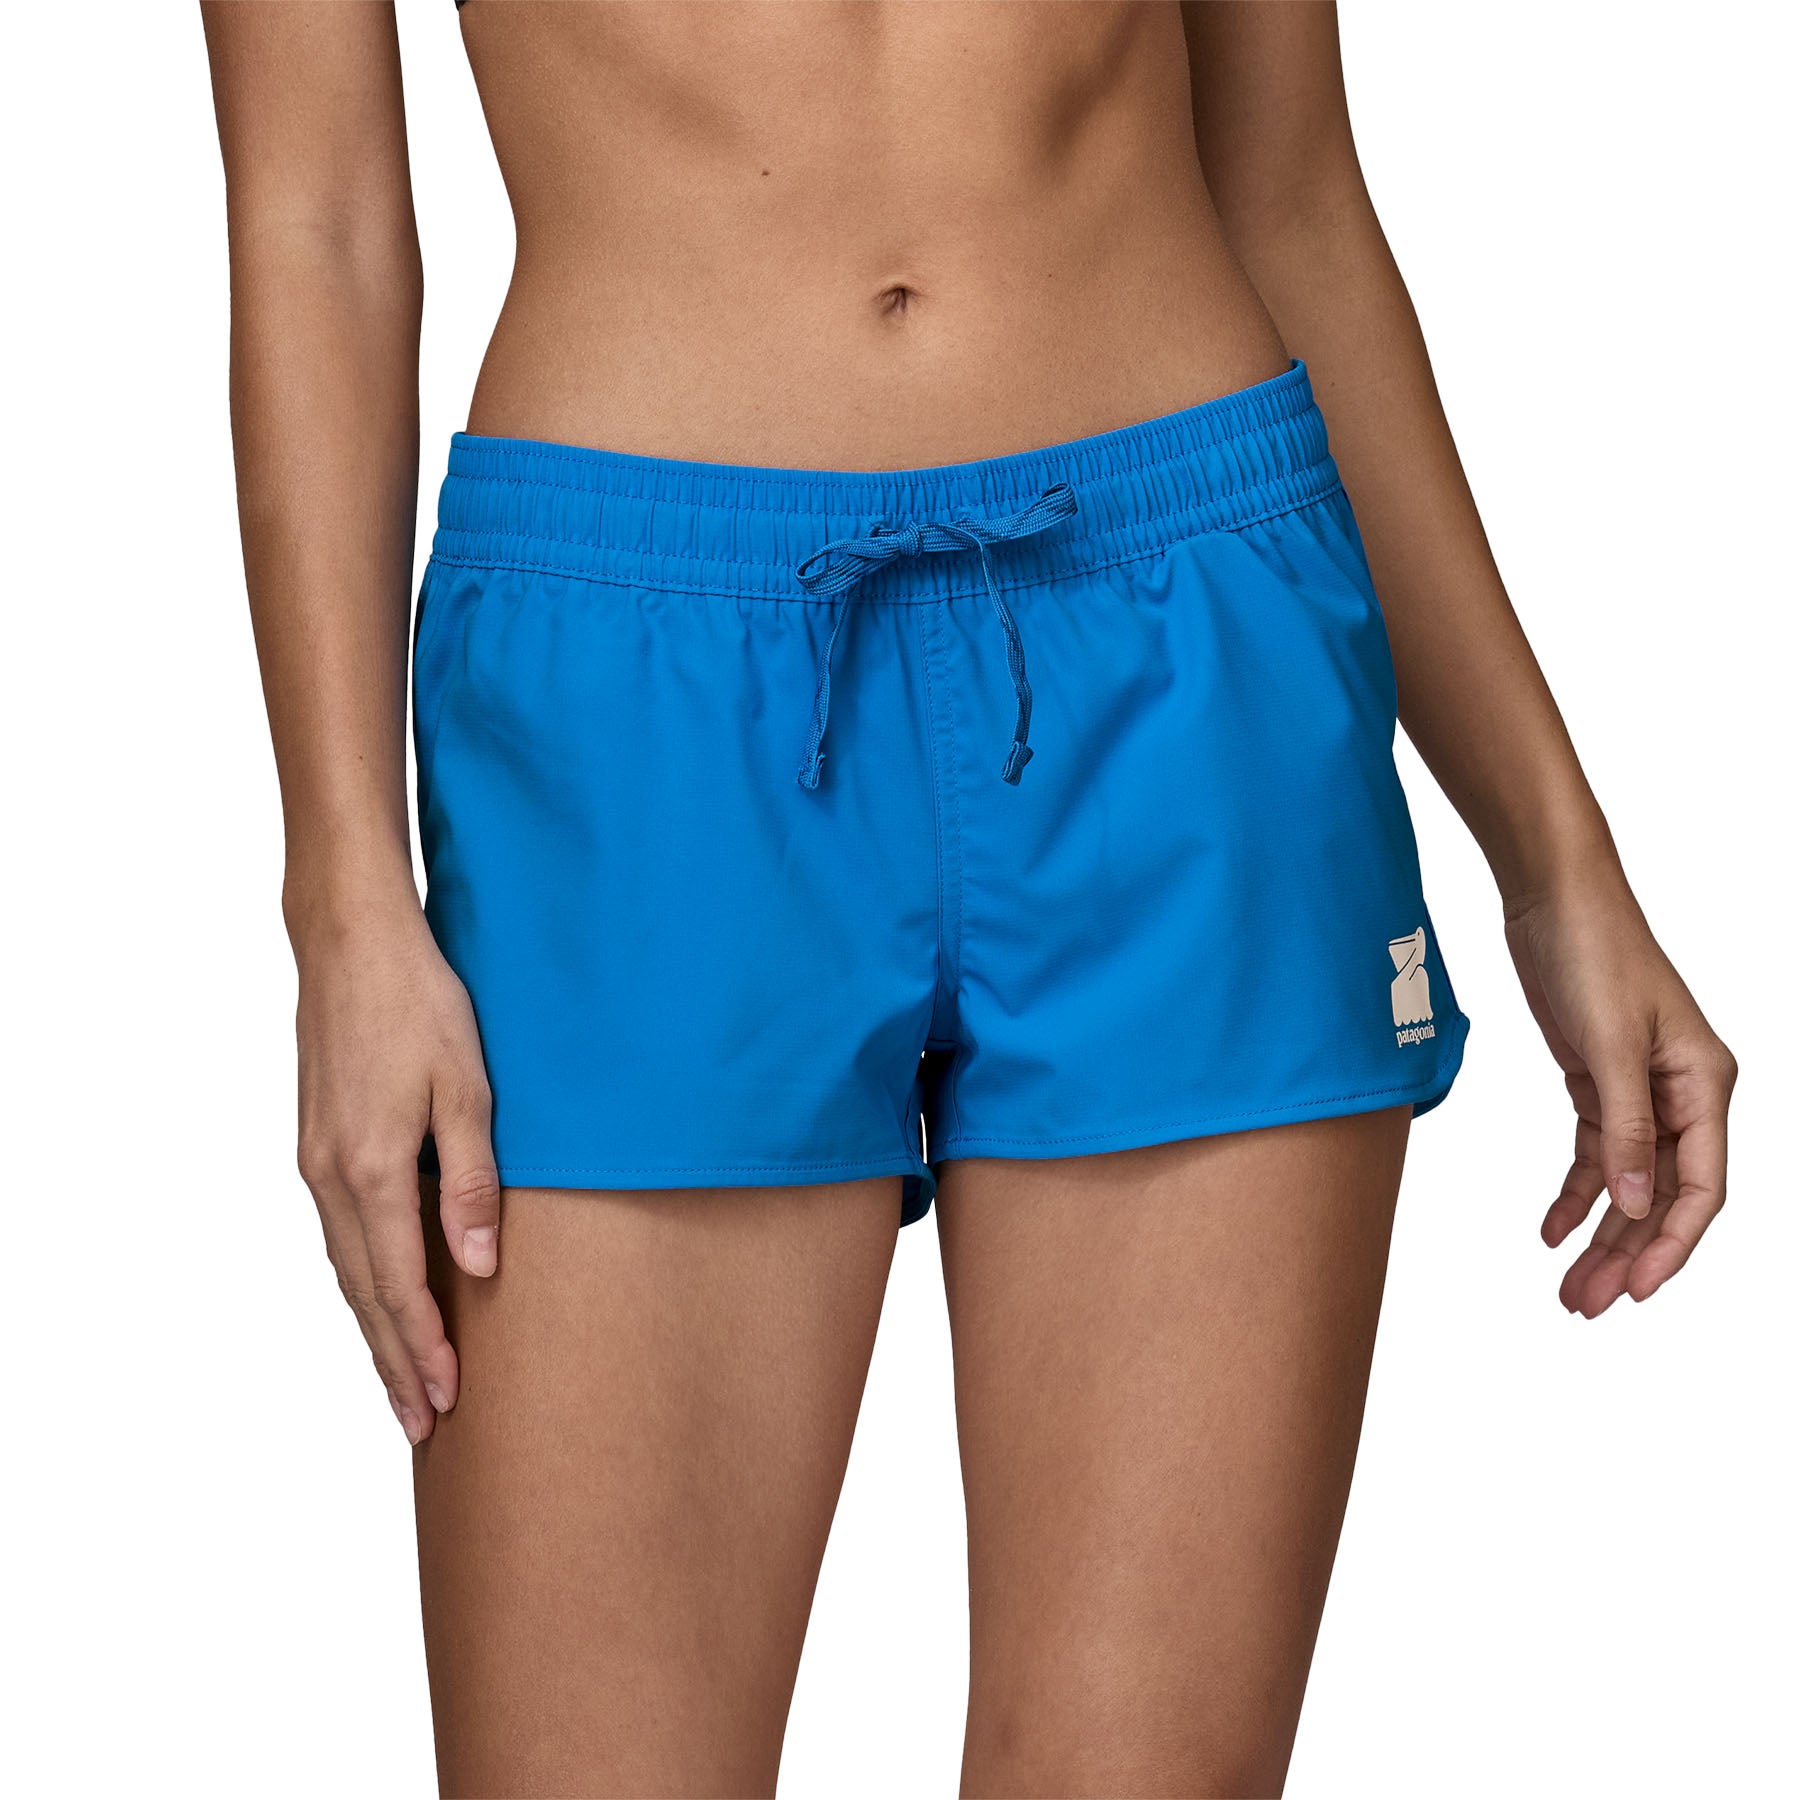 Women's Stretch Planing Micro Shorts - 2 in.